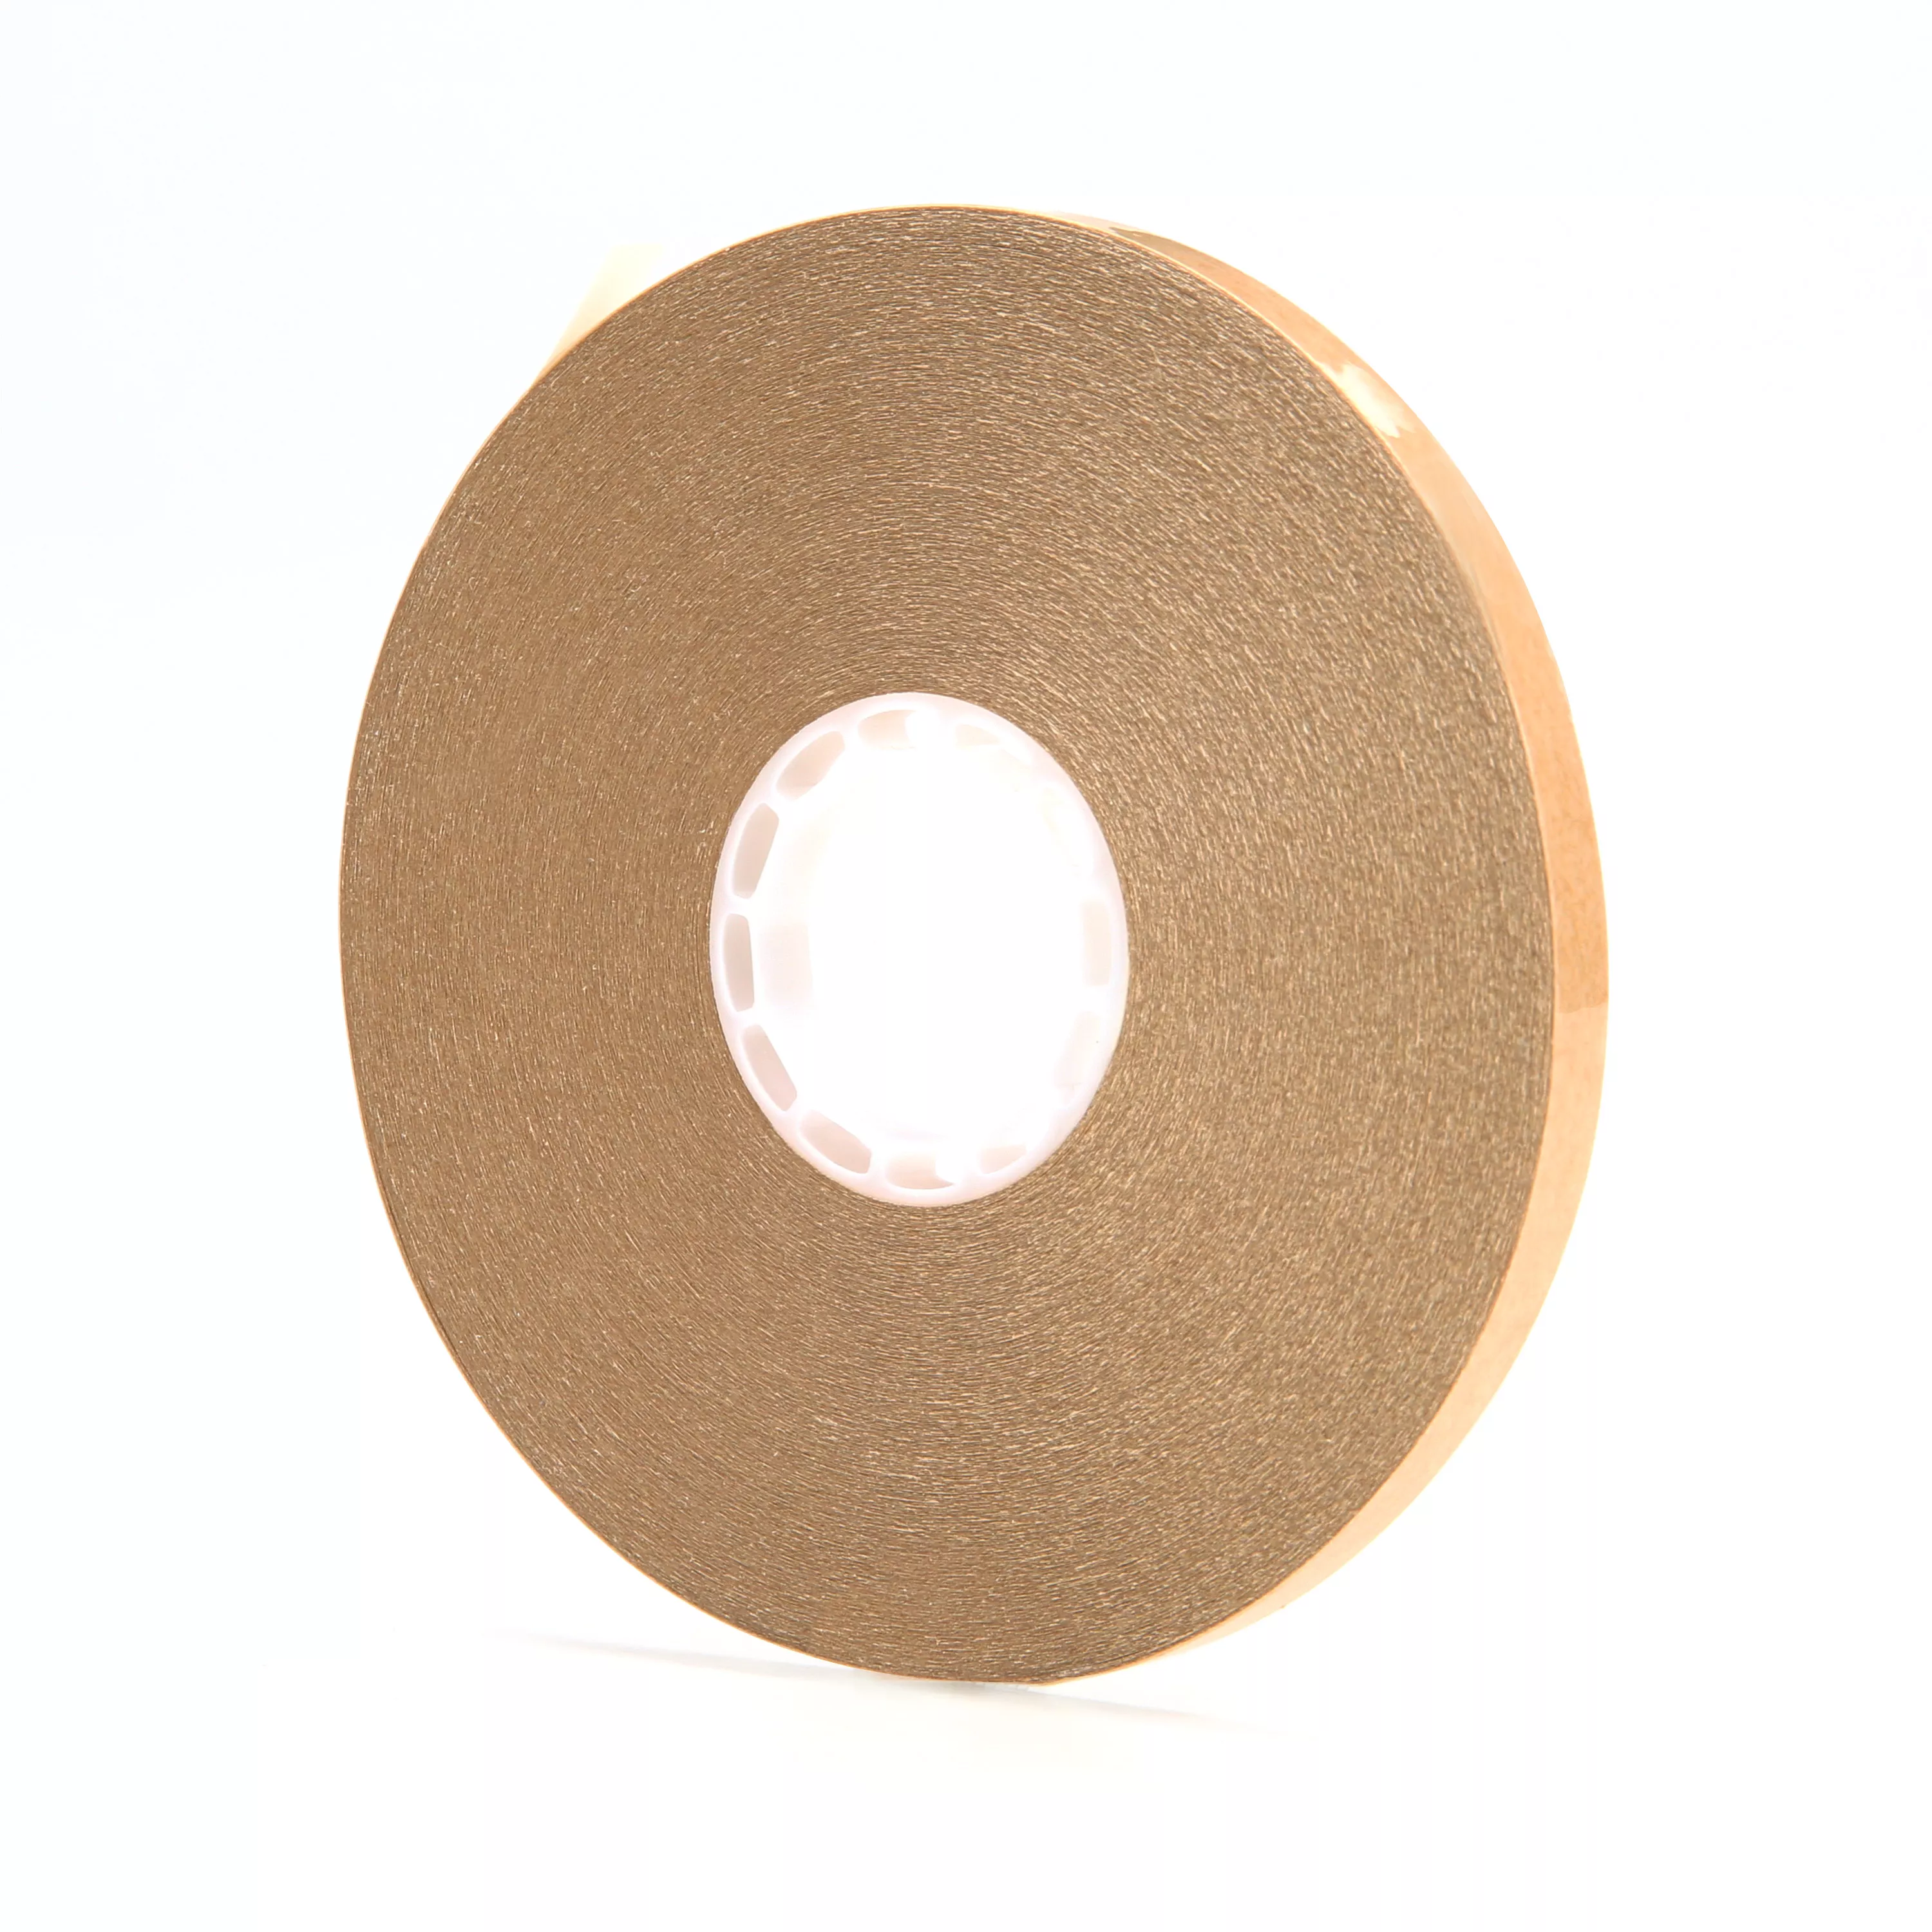 3M™ ATG Adhesive Transfer Tape 987, 1/4 in x 60 yd, 2.0 mil, 72
Roll/Case